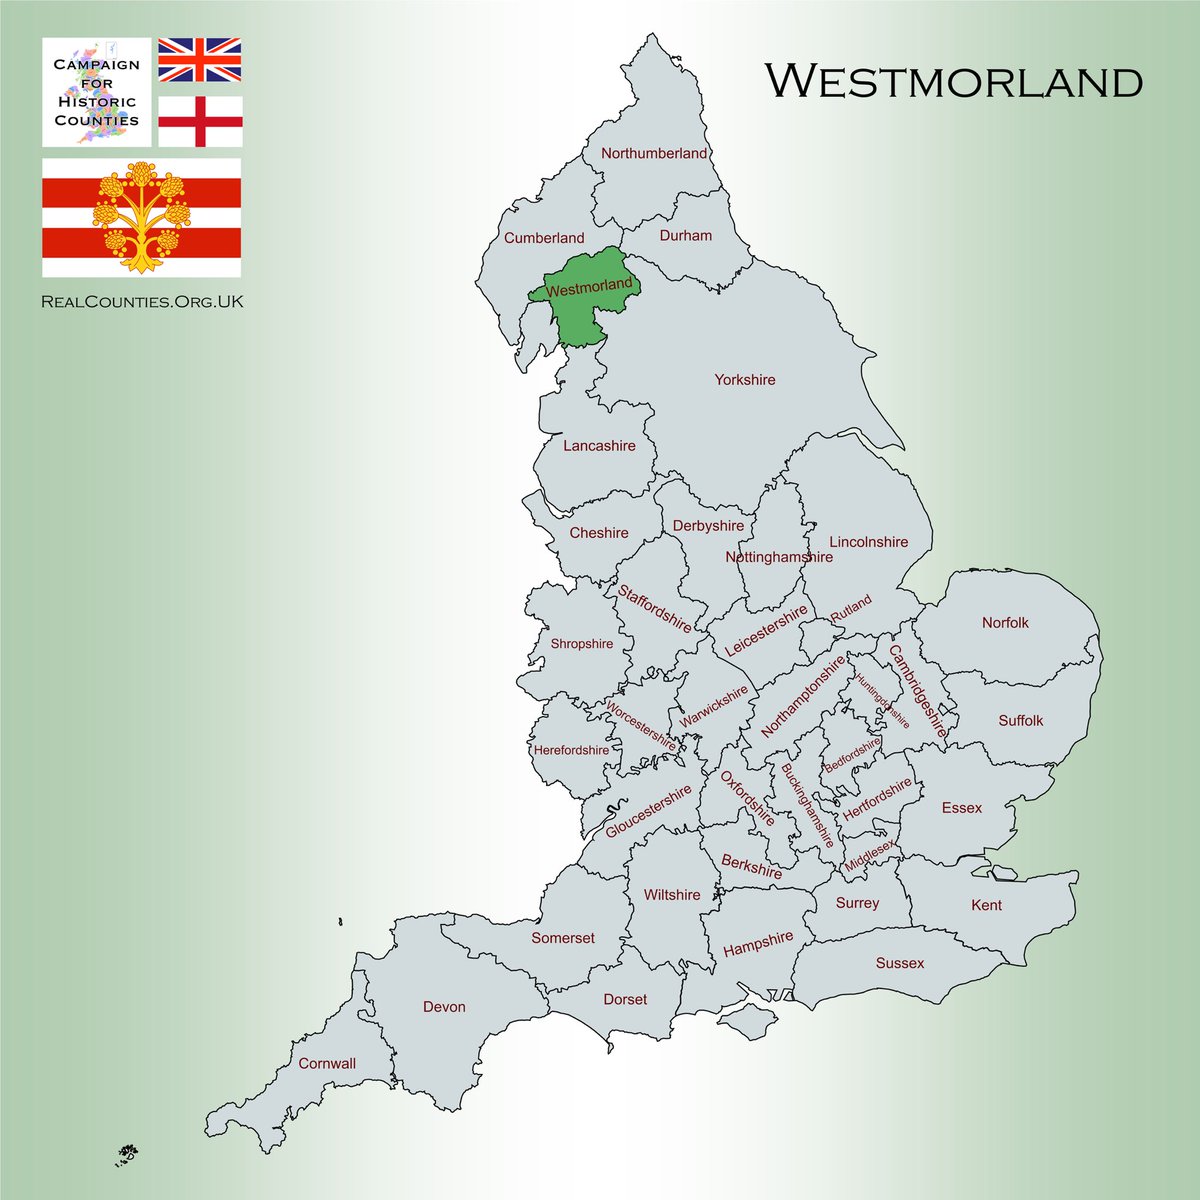 The County of #Westmorland is a mountainous shire, with some of the grandest scenery of the land.

Almost entirely rural, it is dotted with small villages and modest towns in the dales, each looking up at the fells.

🇬🇧 #HistoricCounties | #RealCounties 🏴󠁧󠁢󠁥󠁮󠁧󠁿